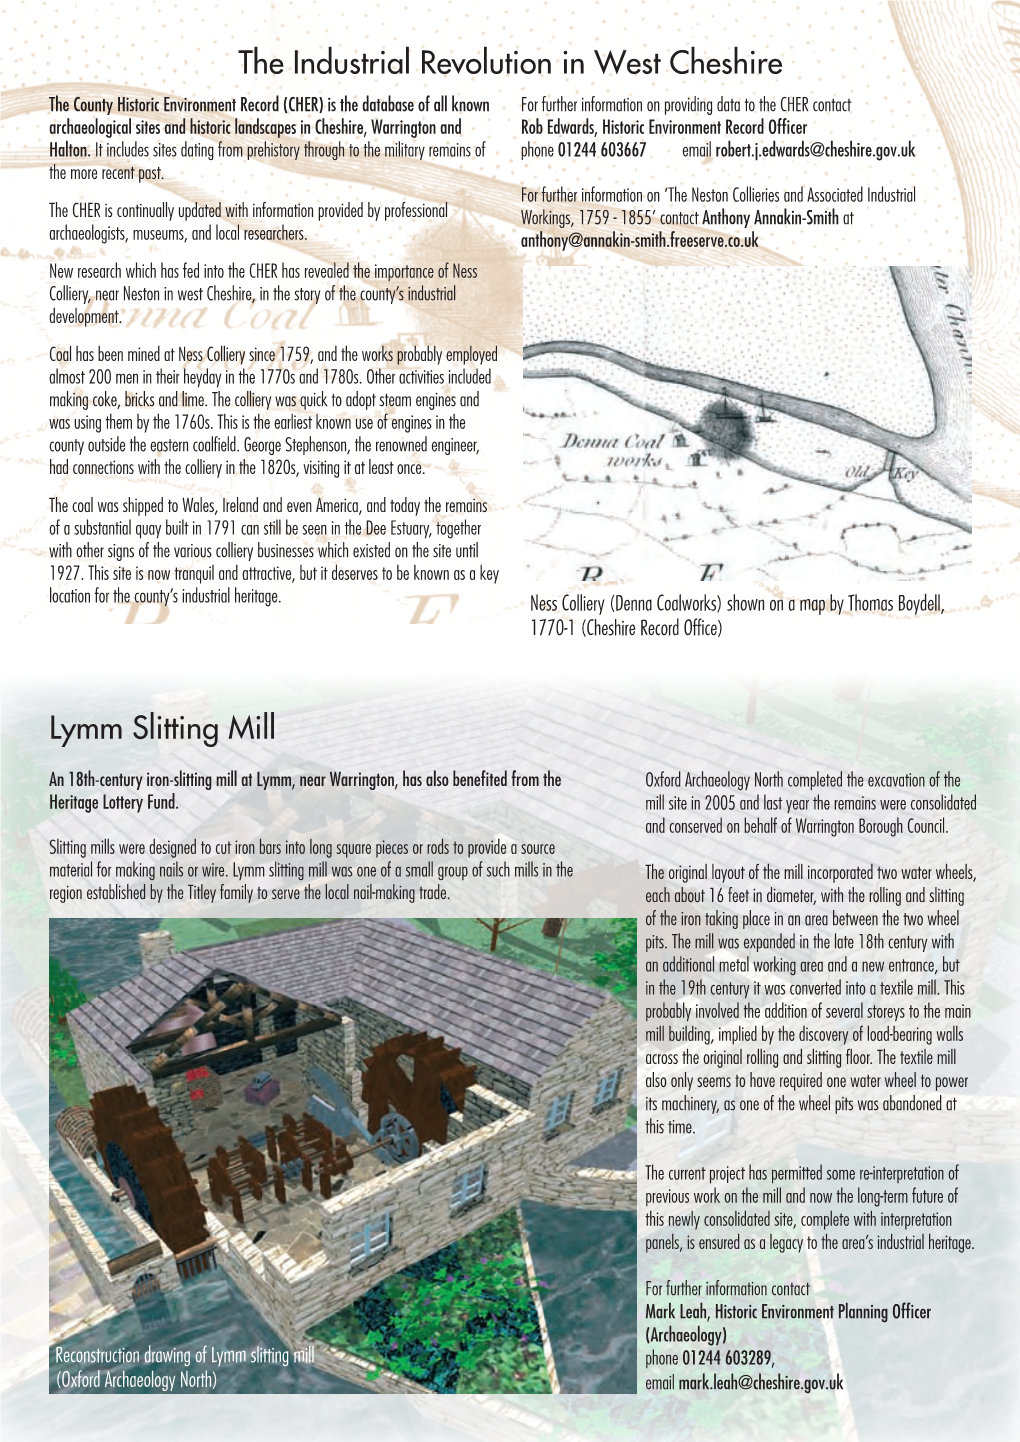 The Industrial Revolution in West Cheshire Lymm Slitting Mill